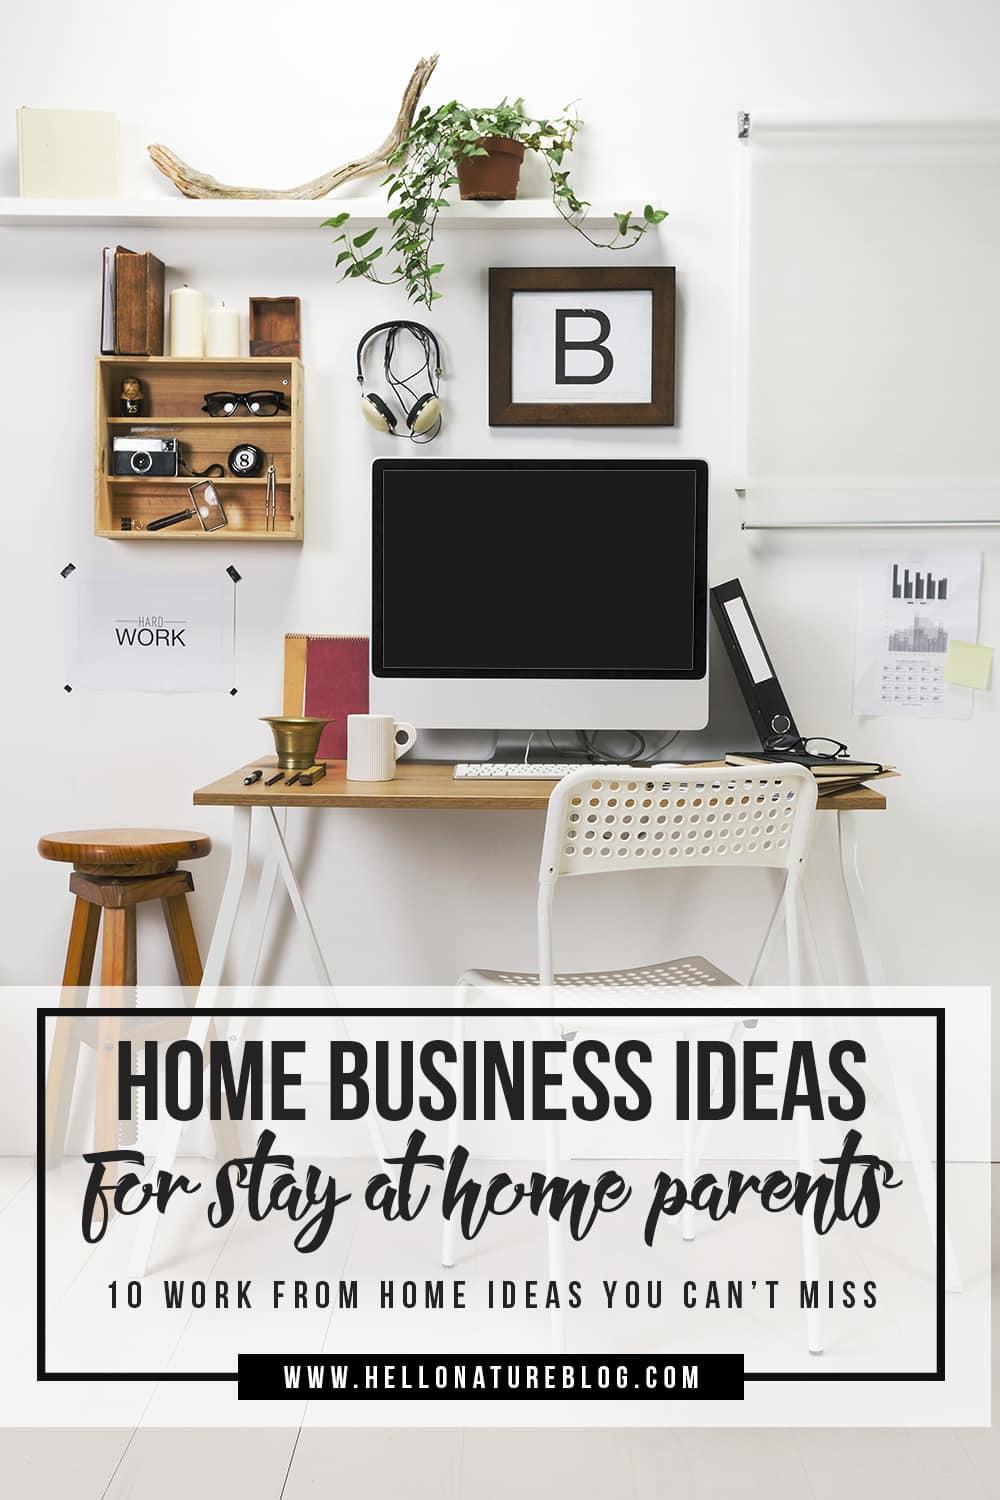 Are you a stay at home mom or dad looking for work from home ideas? You won't want to miss this list of ten home business ideas!